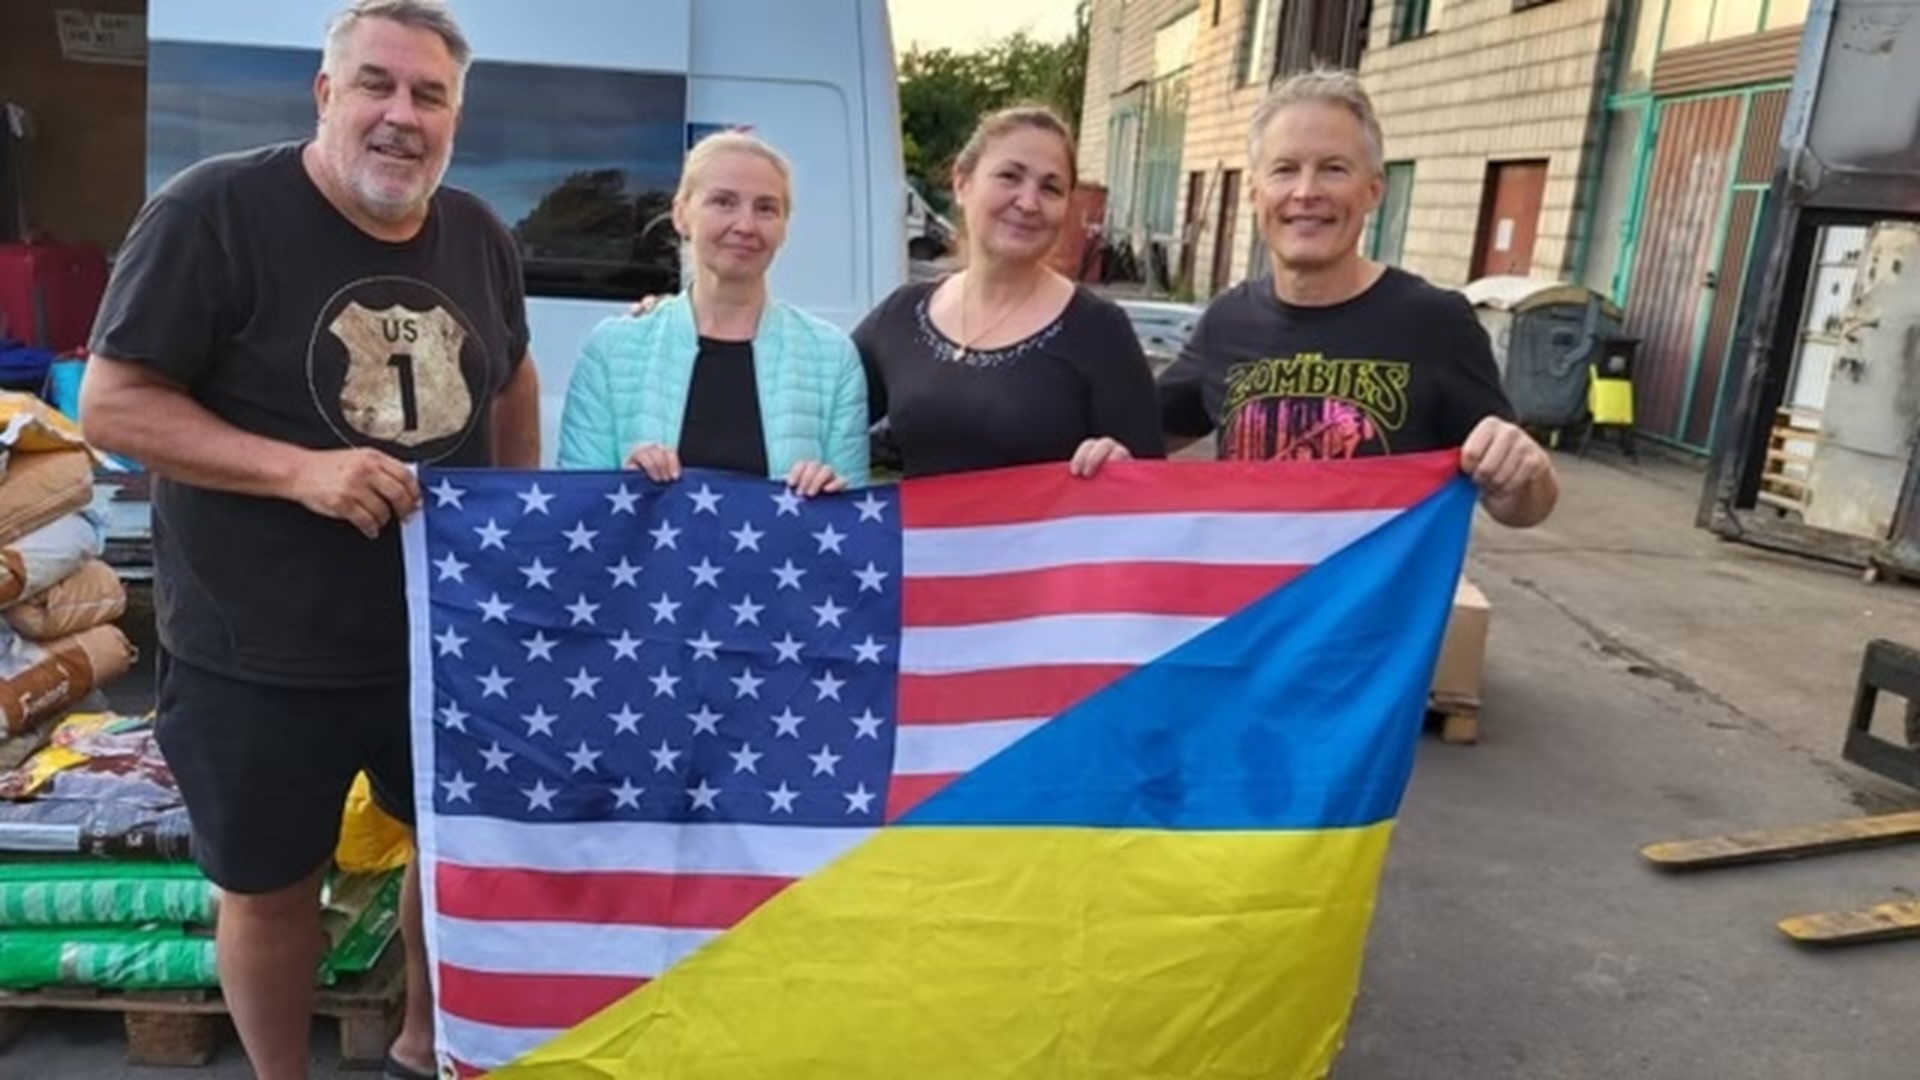 Art Ballard has driven about 3,500 miles over the past month delivering supplies to Ukrainians in need.